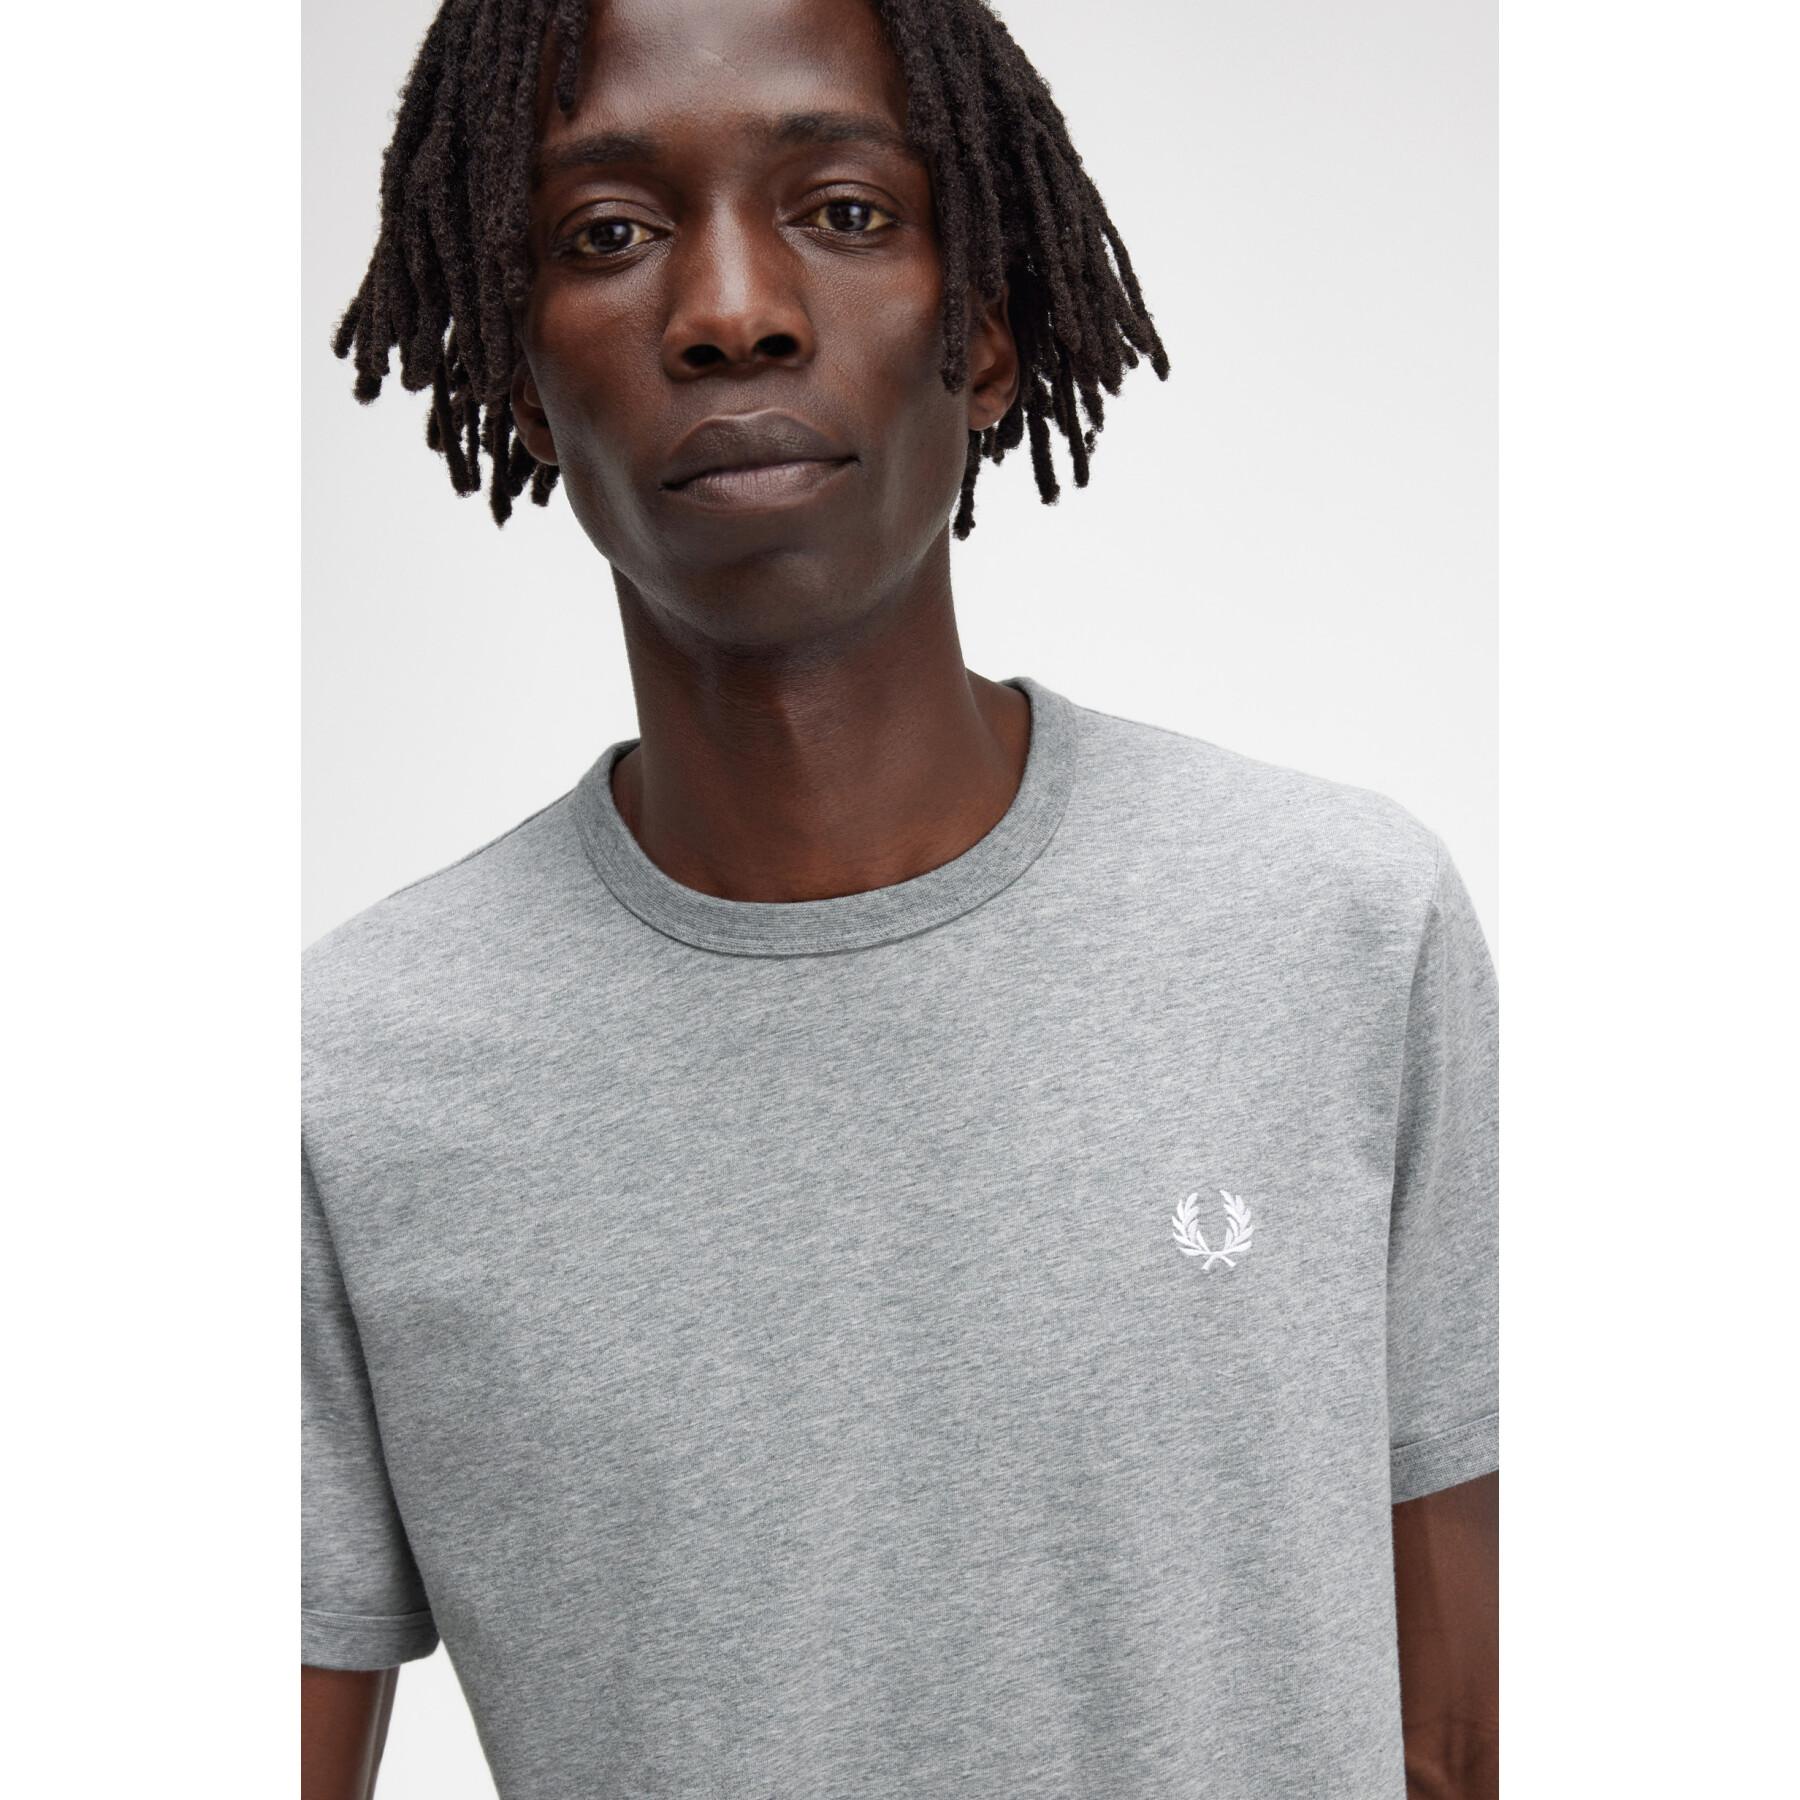 T-Shirt Fred Perry